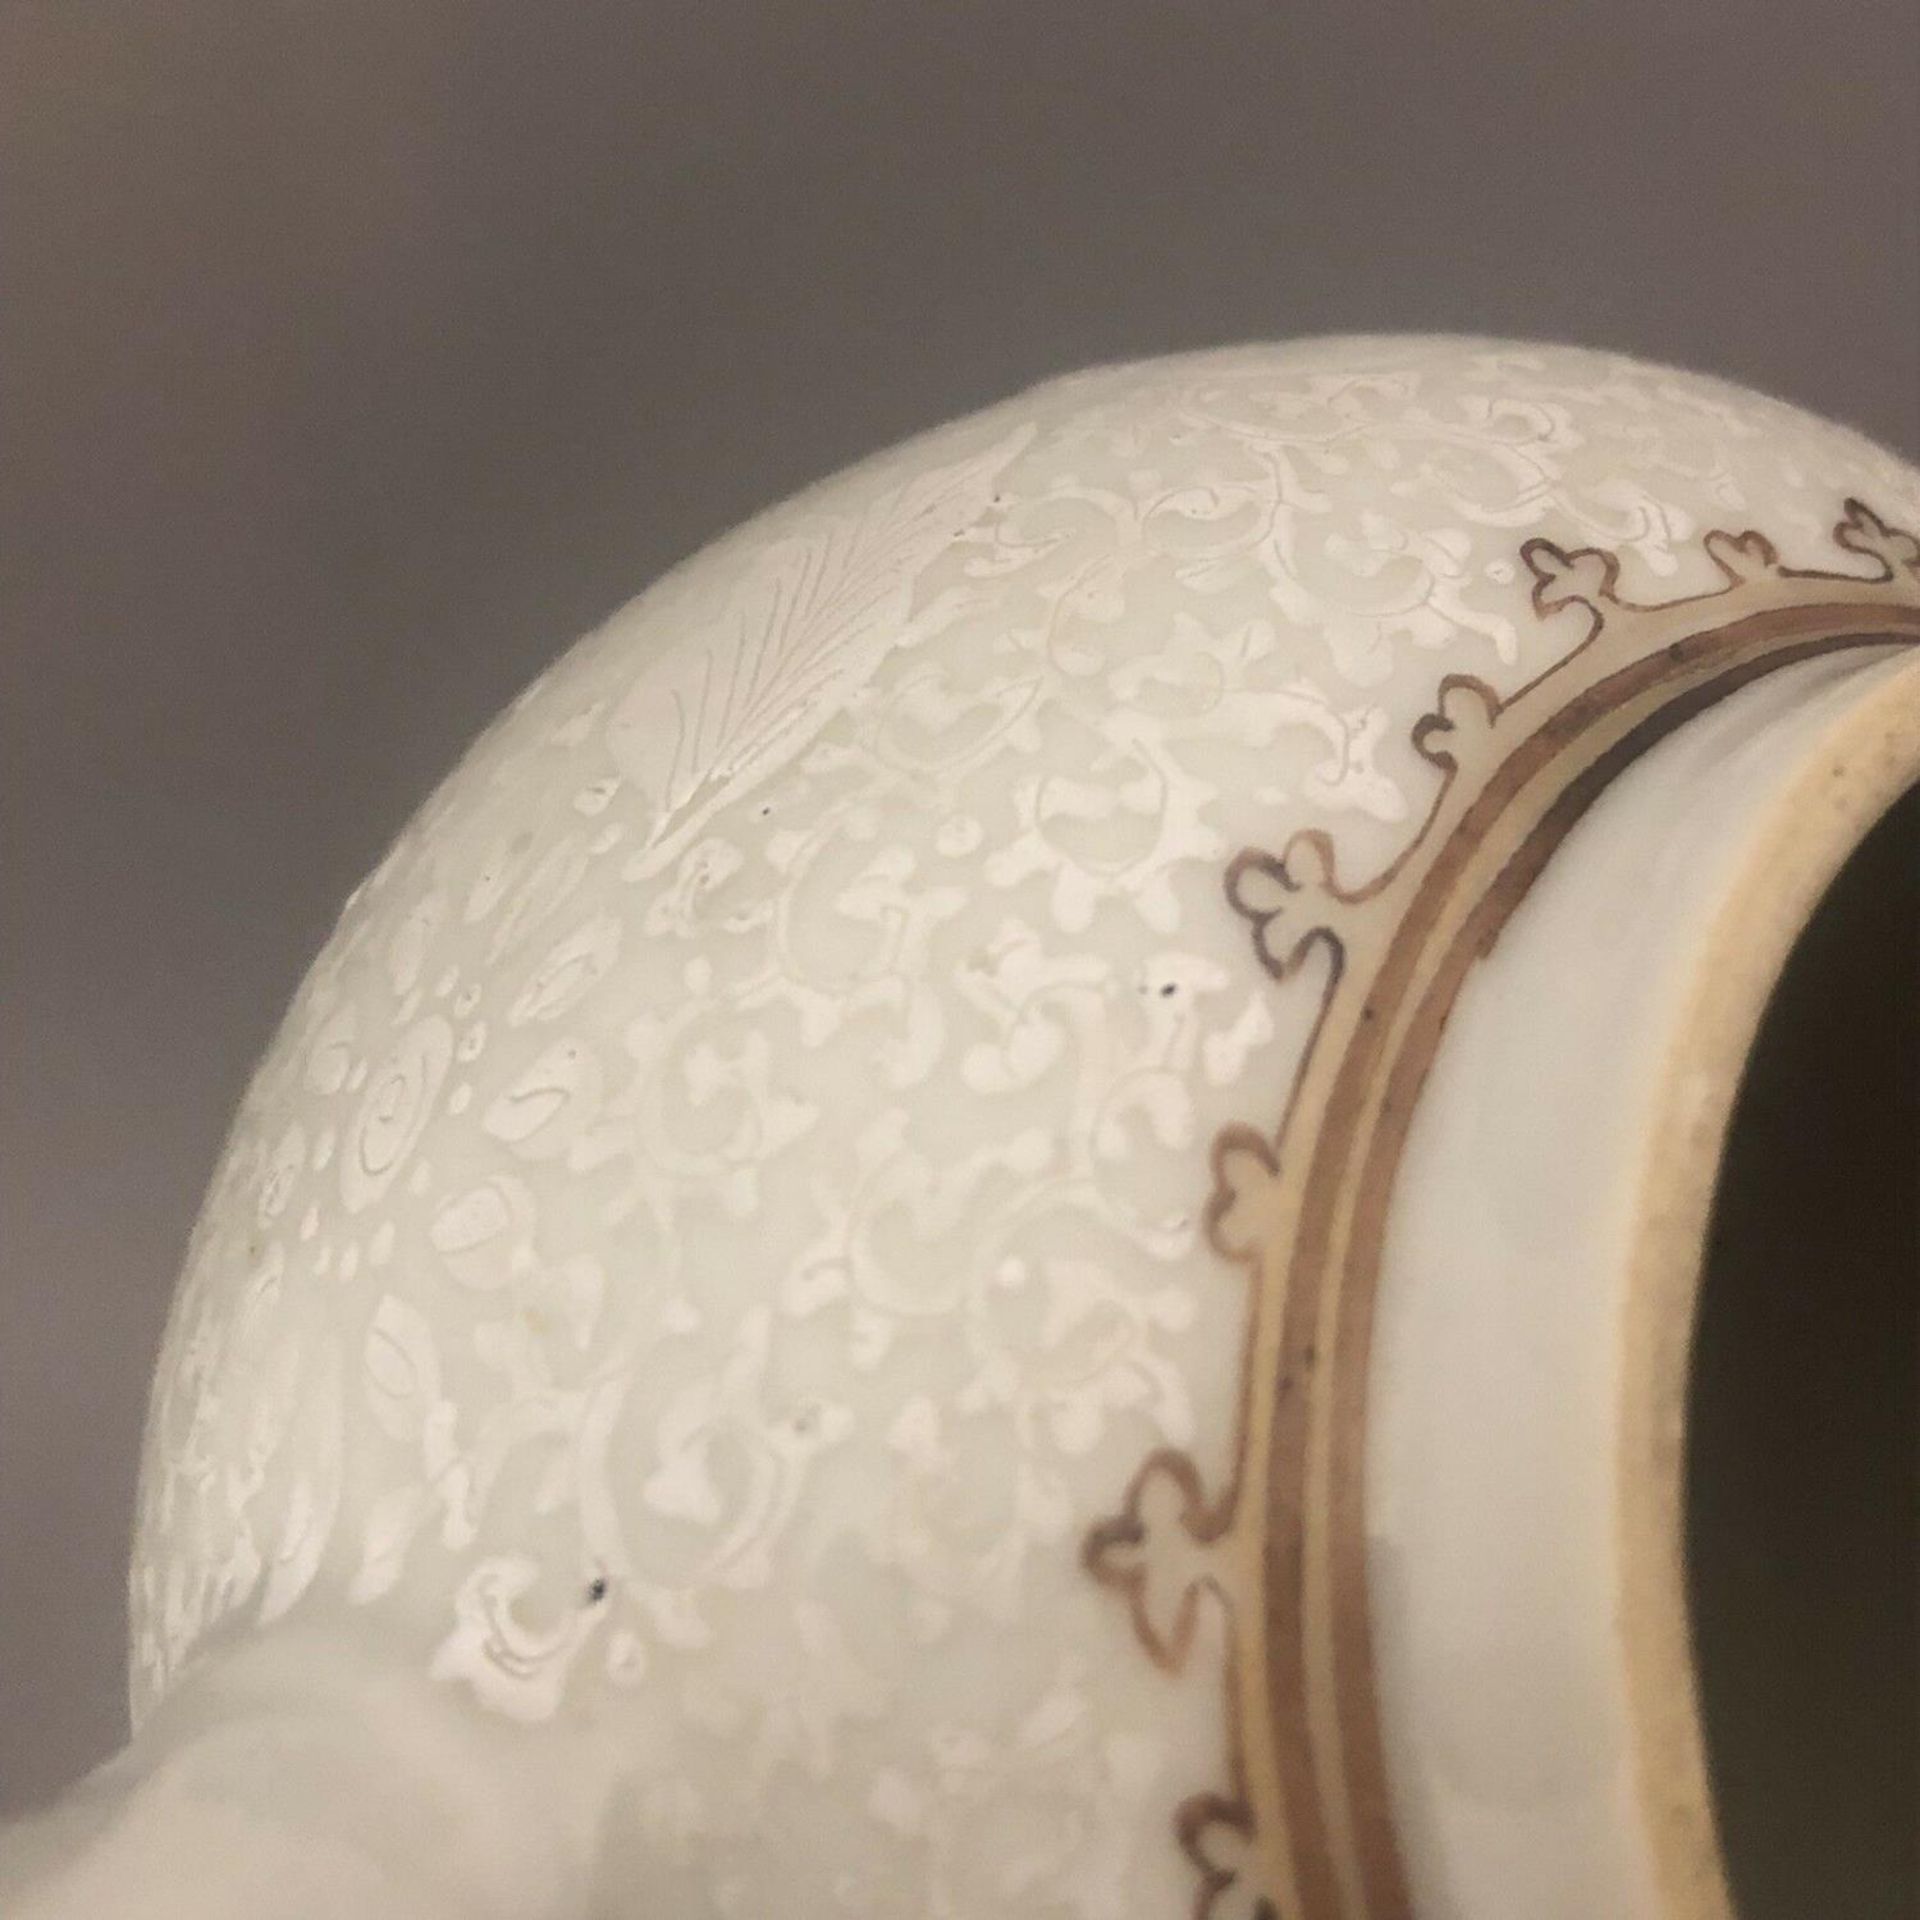 An 18th Century Chinese Bullet Shaped Teapot - Celadon Glaze & Detailed design - Image 7 of 9